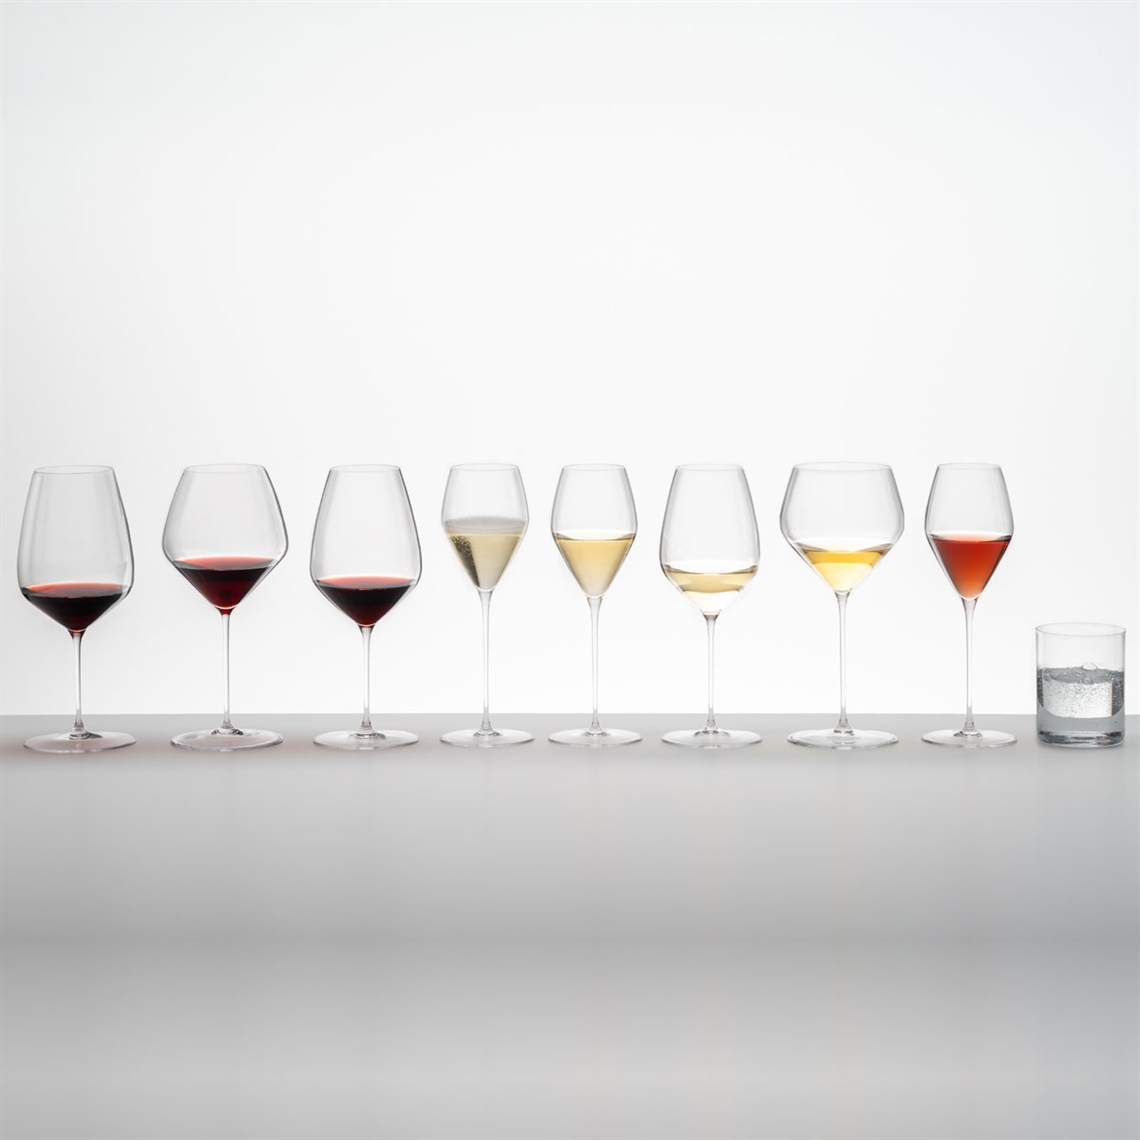 View our collection of Riedel Veloce Riedel Vinum